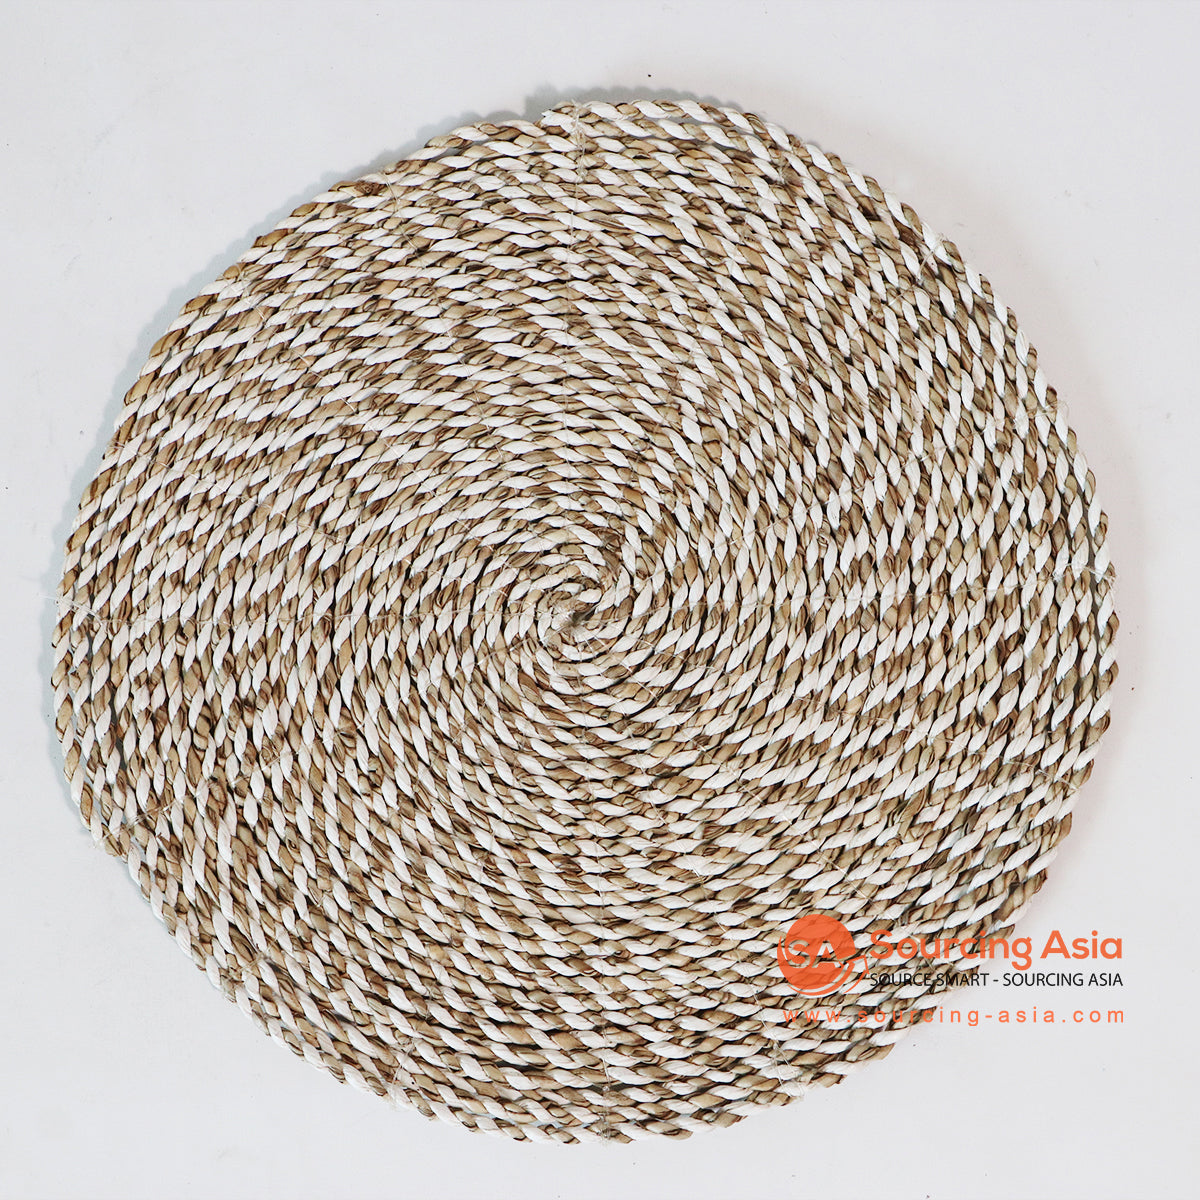 MTIC031-1 WHITE AND NATURAL WOVEN SEAGRASS PLACEMAT